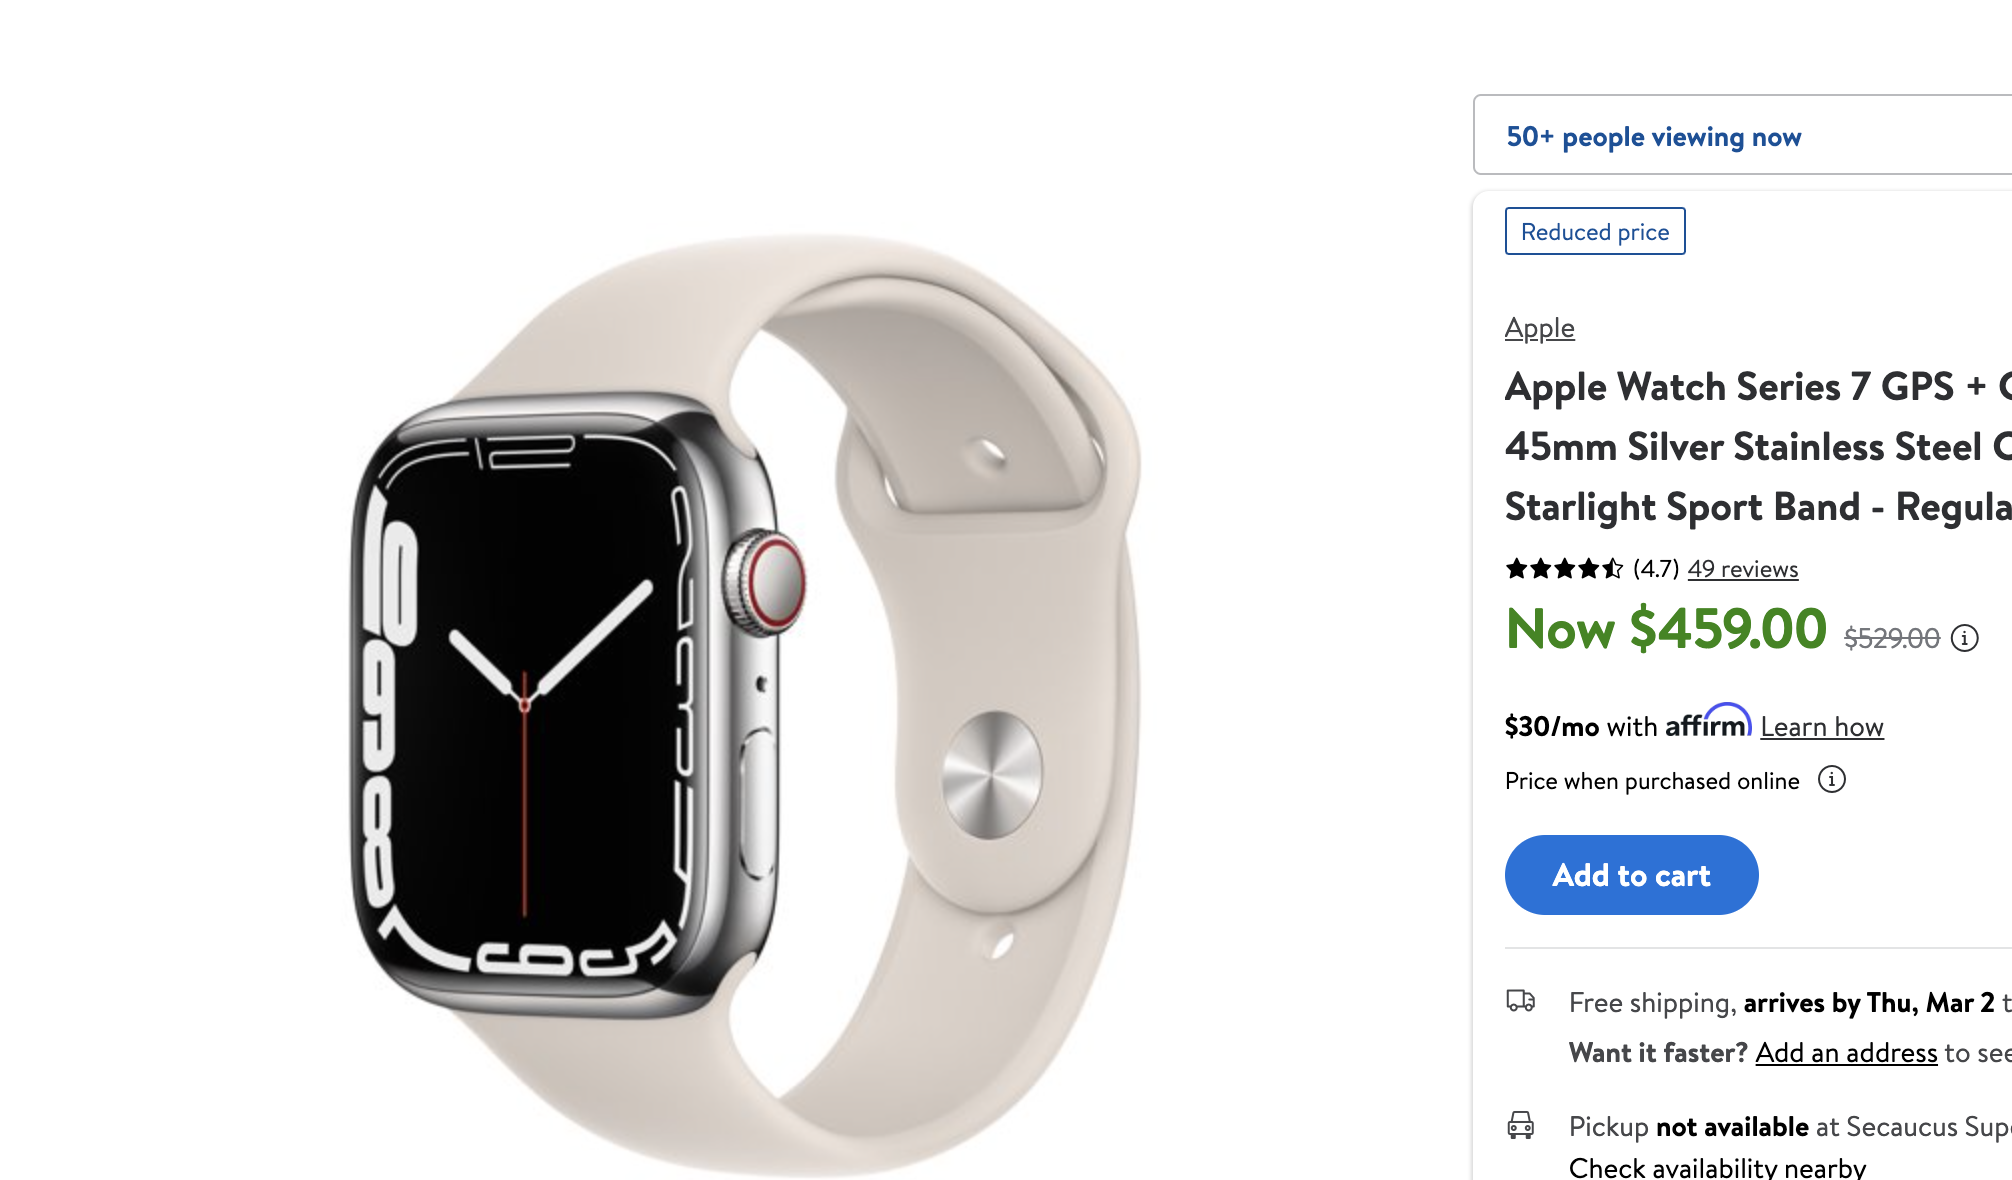 Walmart | Apple Watch Series 7 GPS + Cellular, 41mm and 45mm Stainless Steel watches | All colors on sale